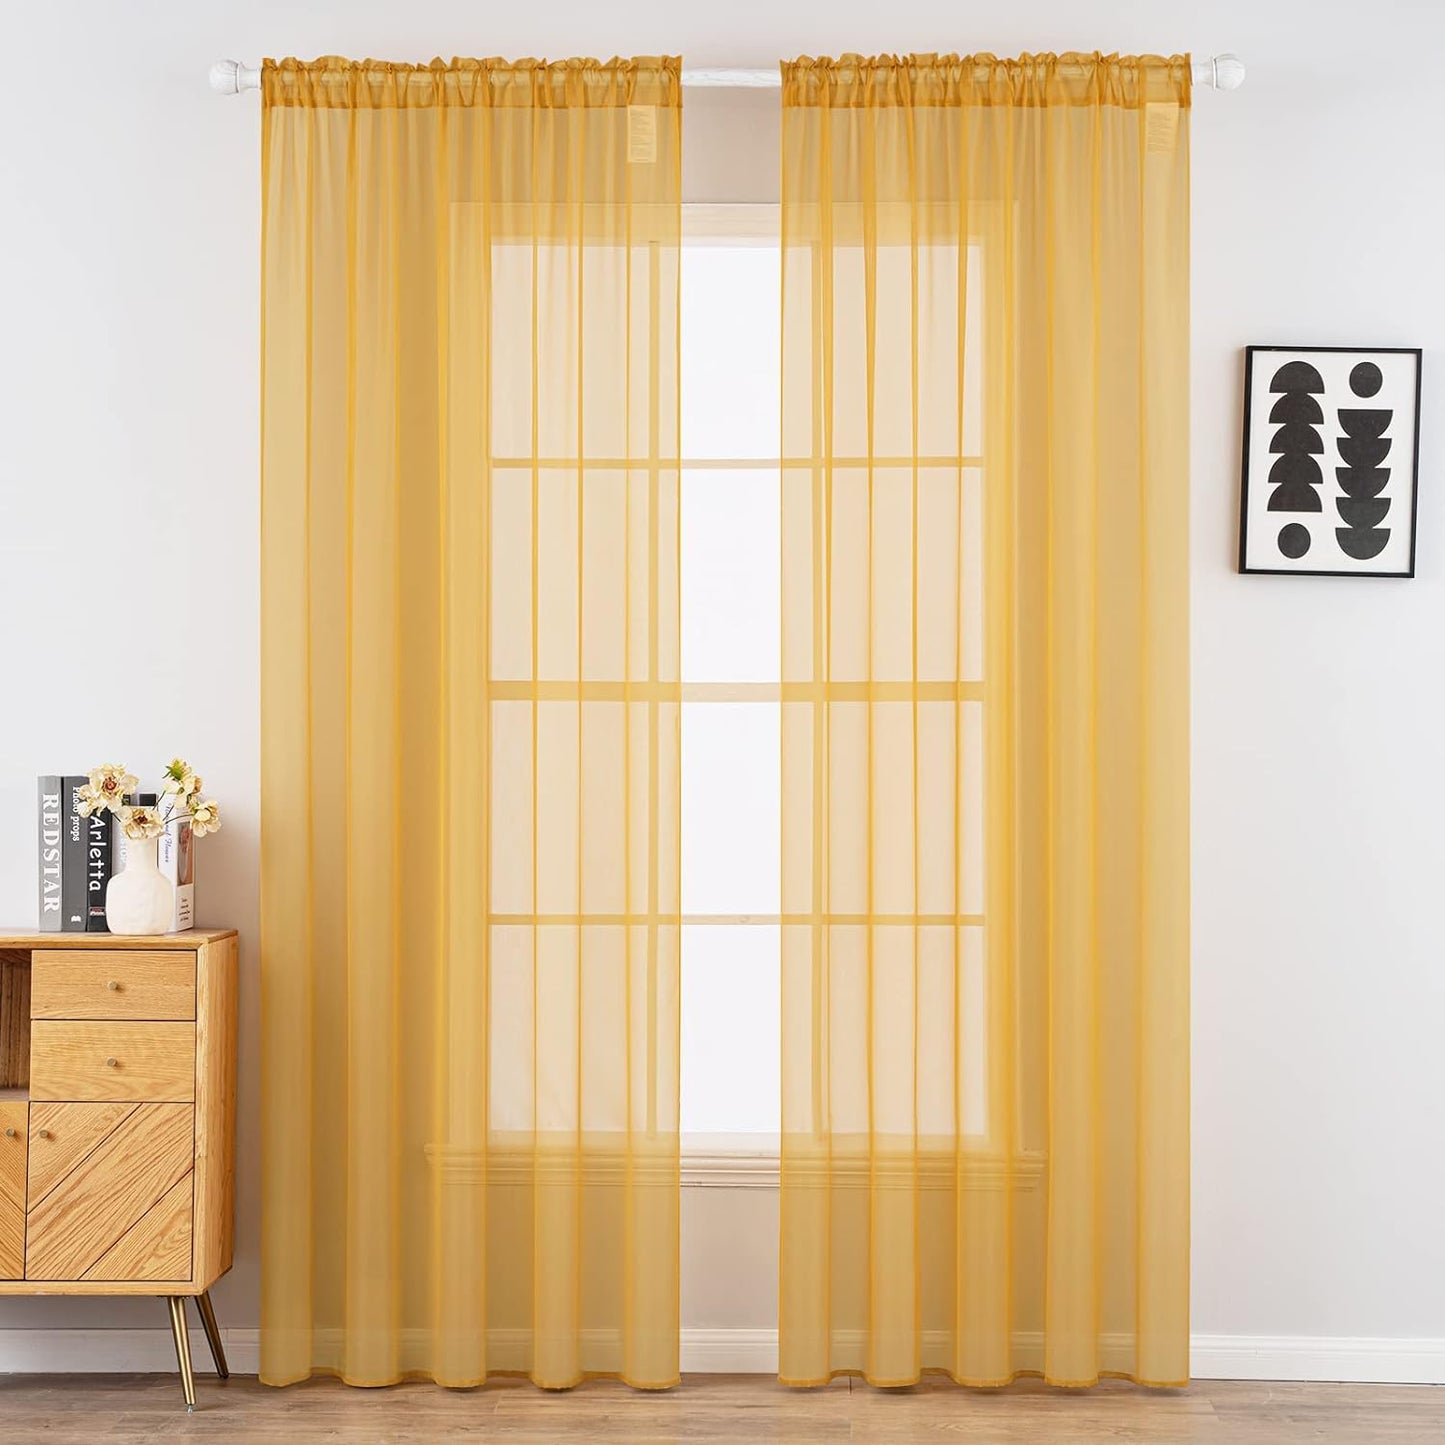 MIULEE White Sheer Curtains 96 Inches Long Window Curtains 2 Panels Solid Color Elegant Window Voile Panels/Drapes/Treatment for Bedroom Living Room (54 X 96 Inches White)  MIULEE Gold 54''W X 72''L 